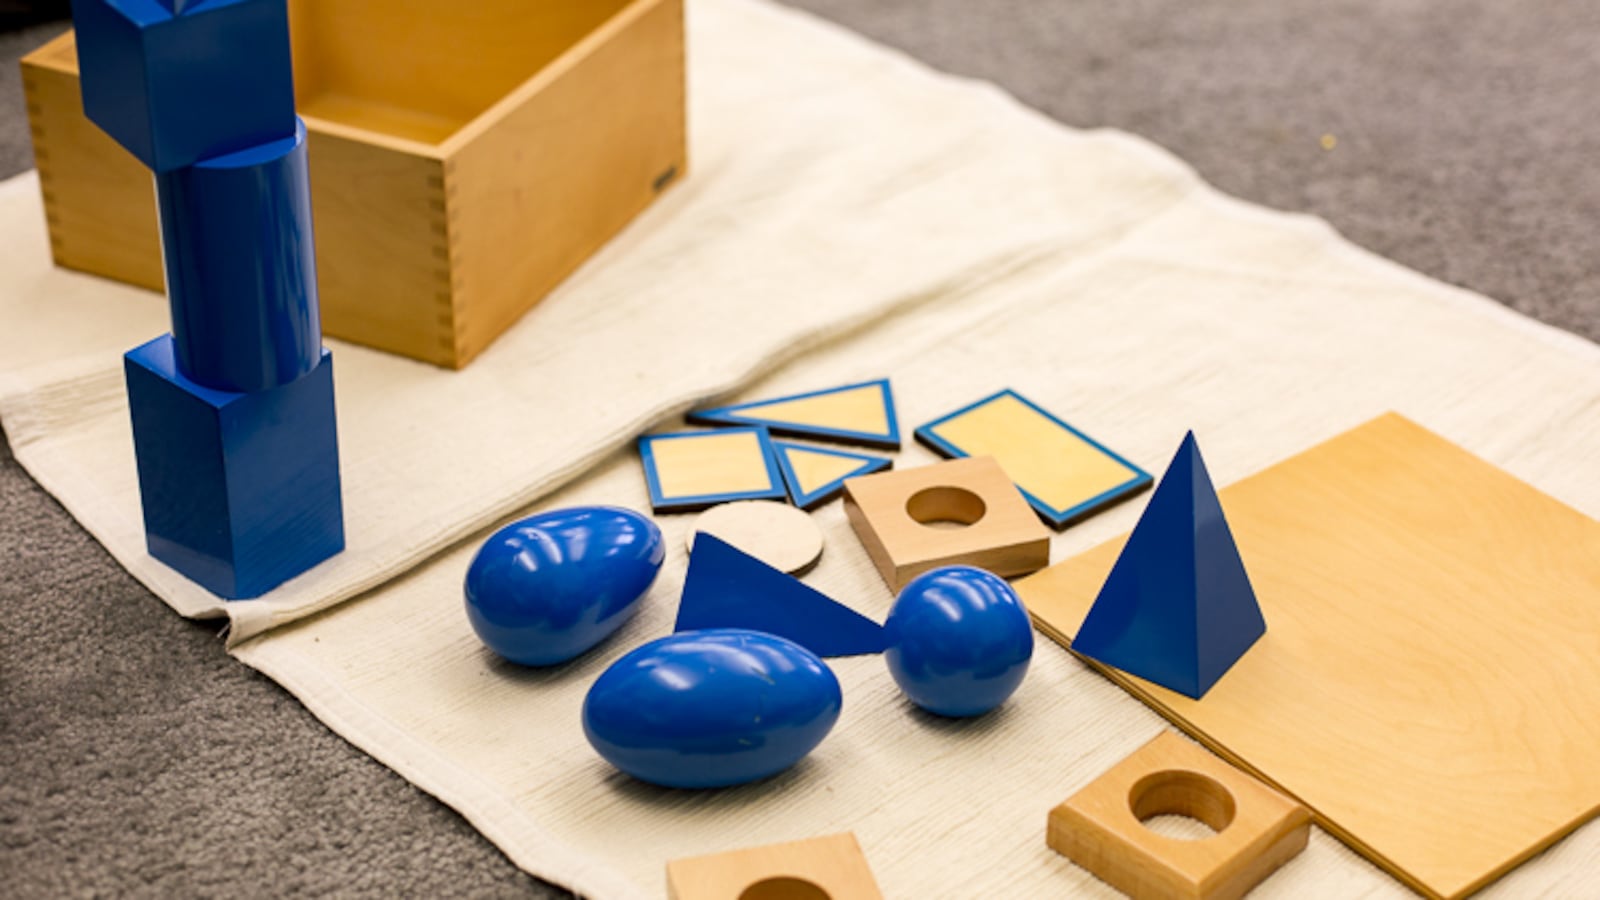 Montessori classrooms use specialized materials like wooden blocks to teach math and other concepts.